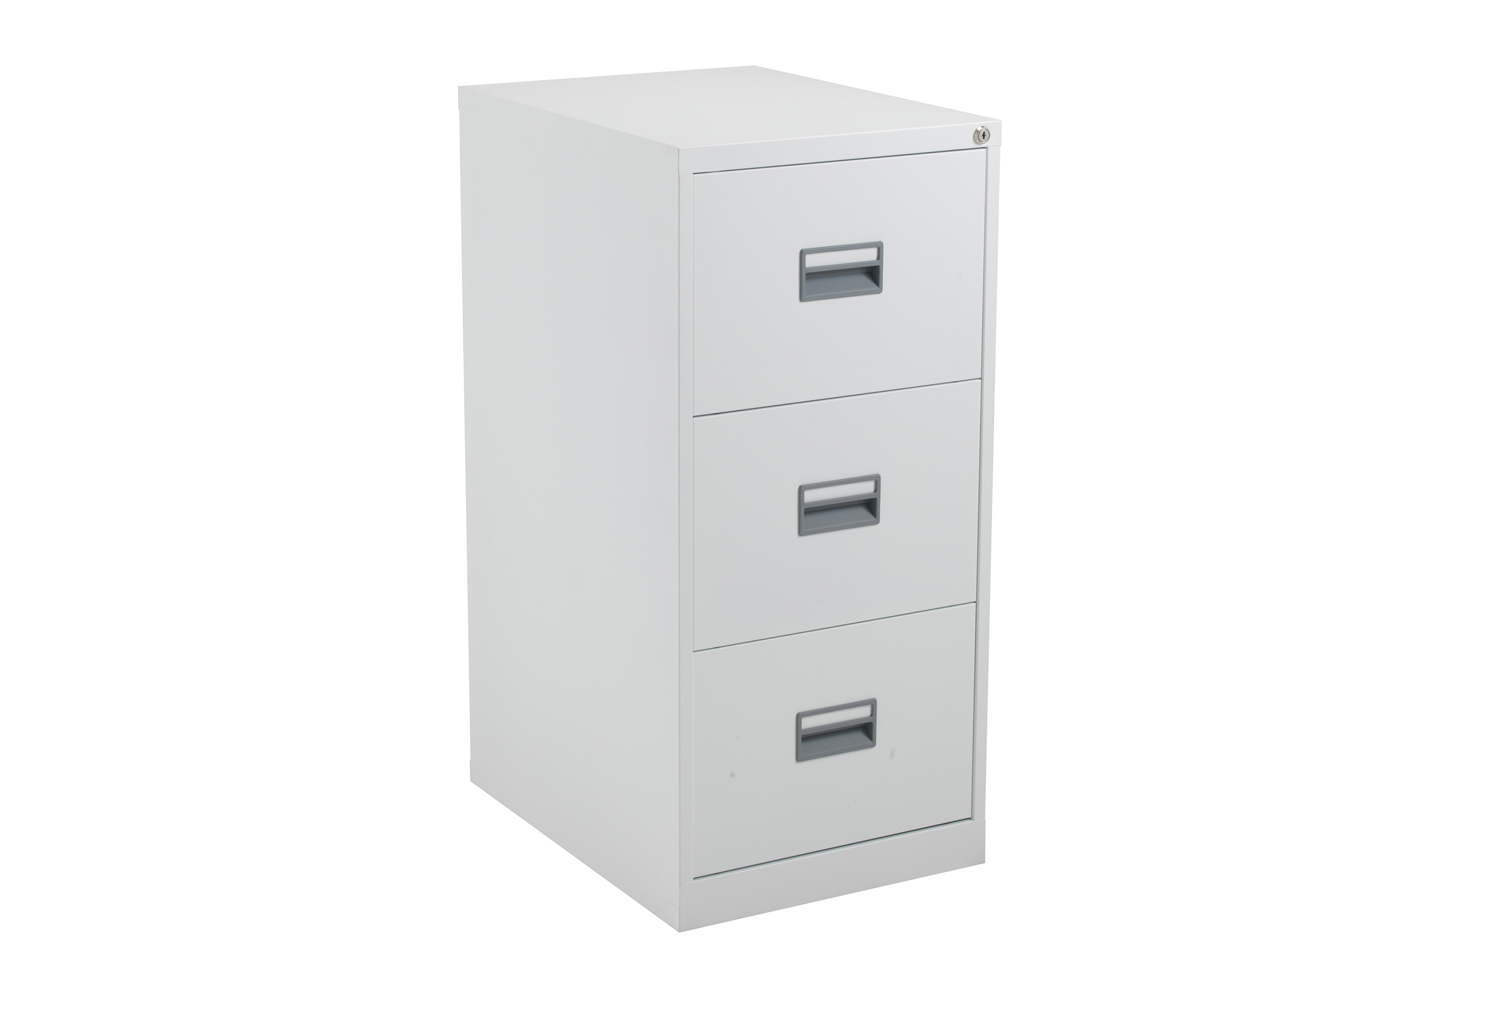 Value Line Metal Filing Cabinet, 3 Drawer - 47wx62dx100h (cm), White, Express Delivery